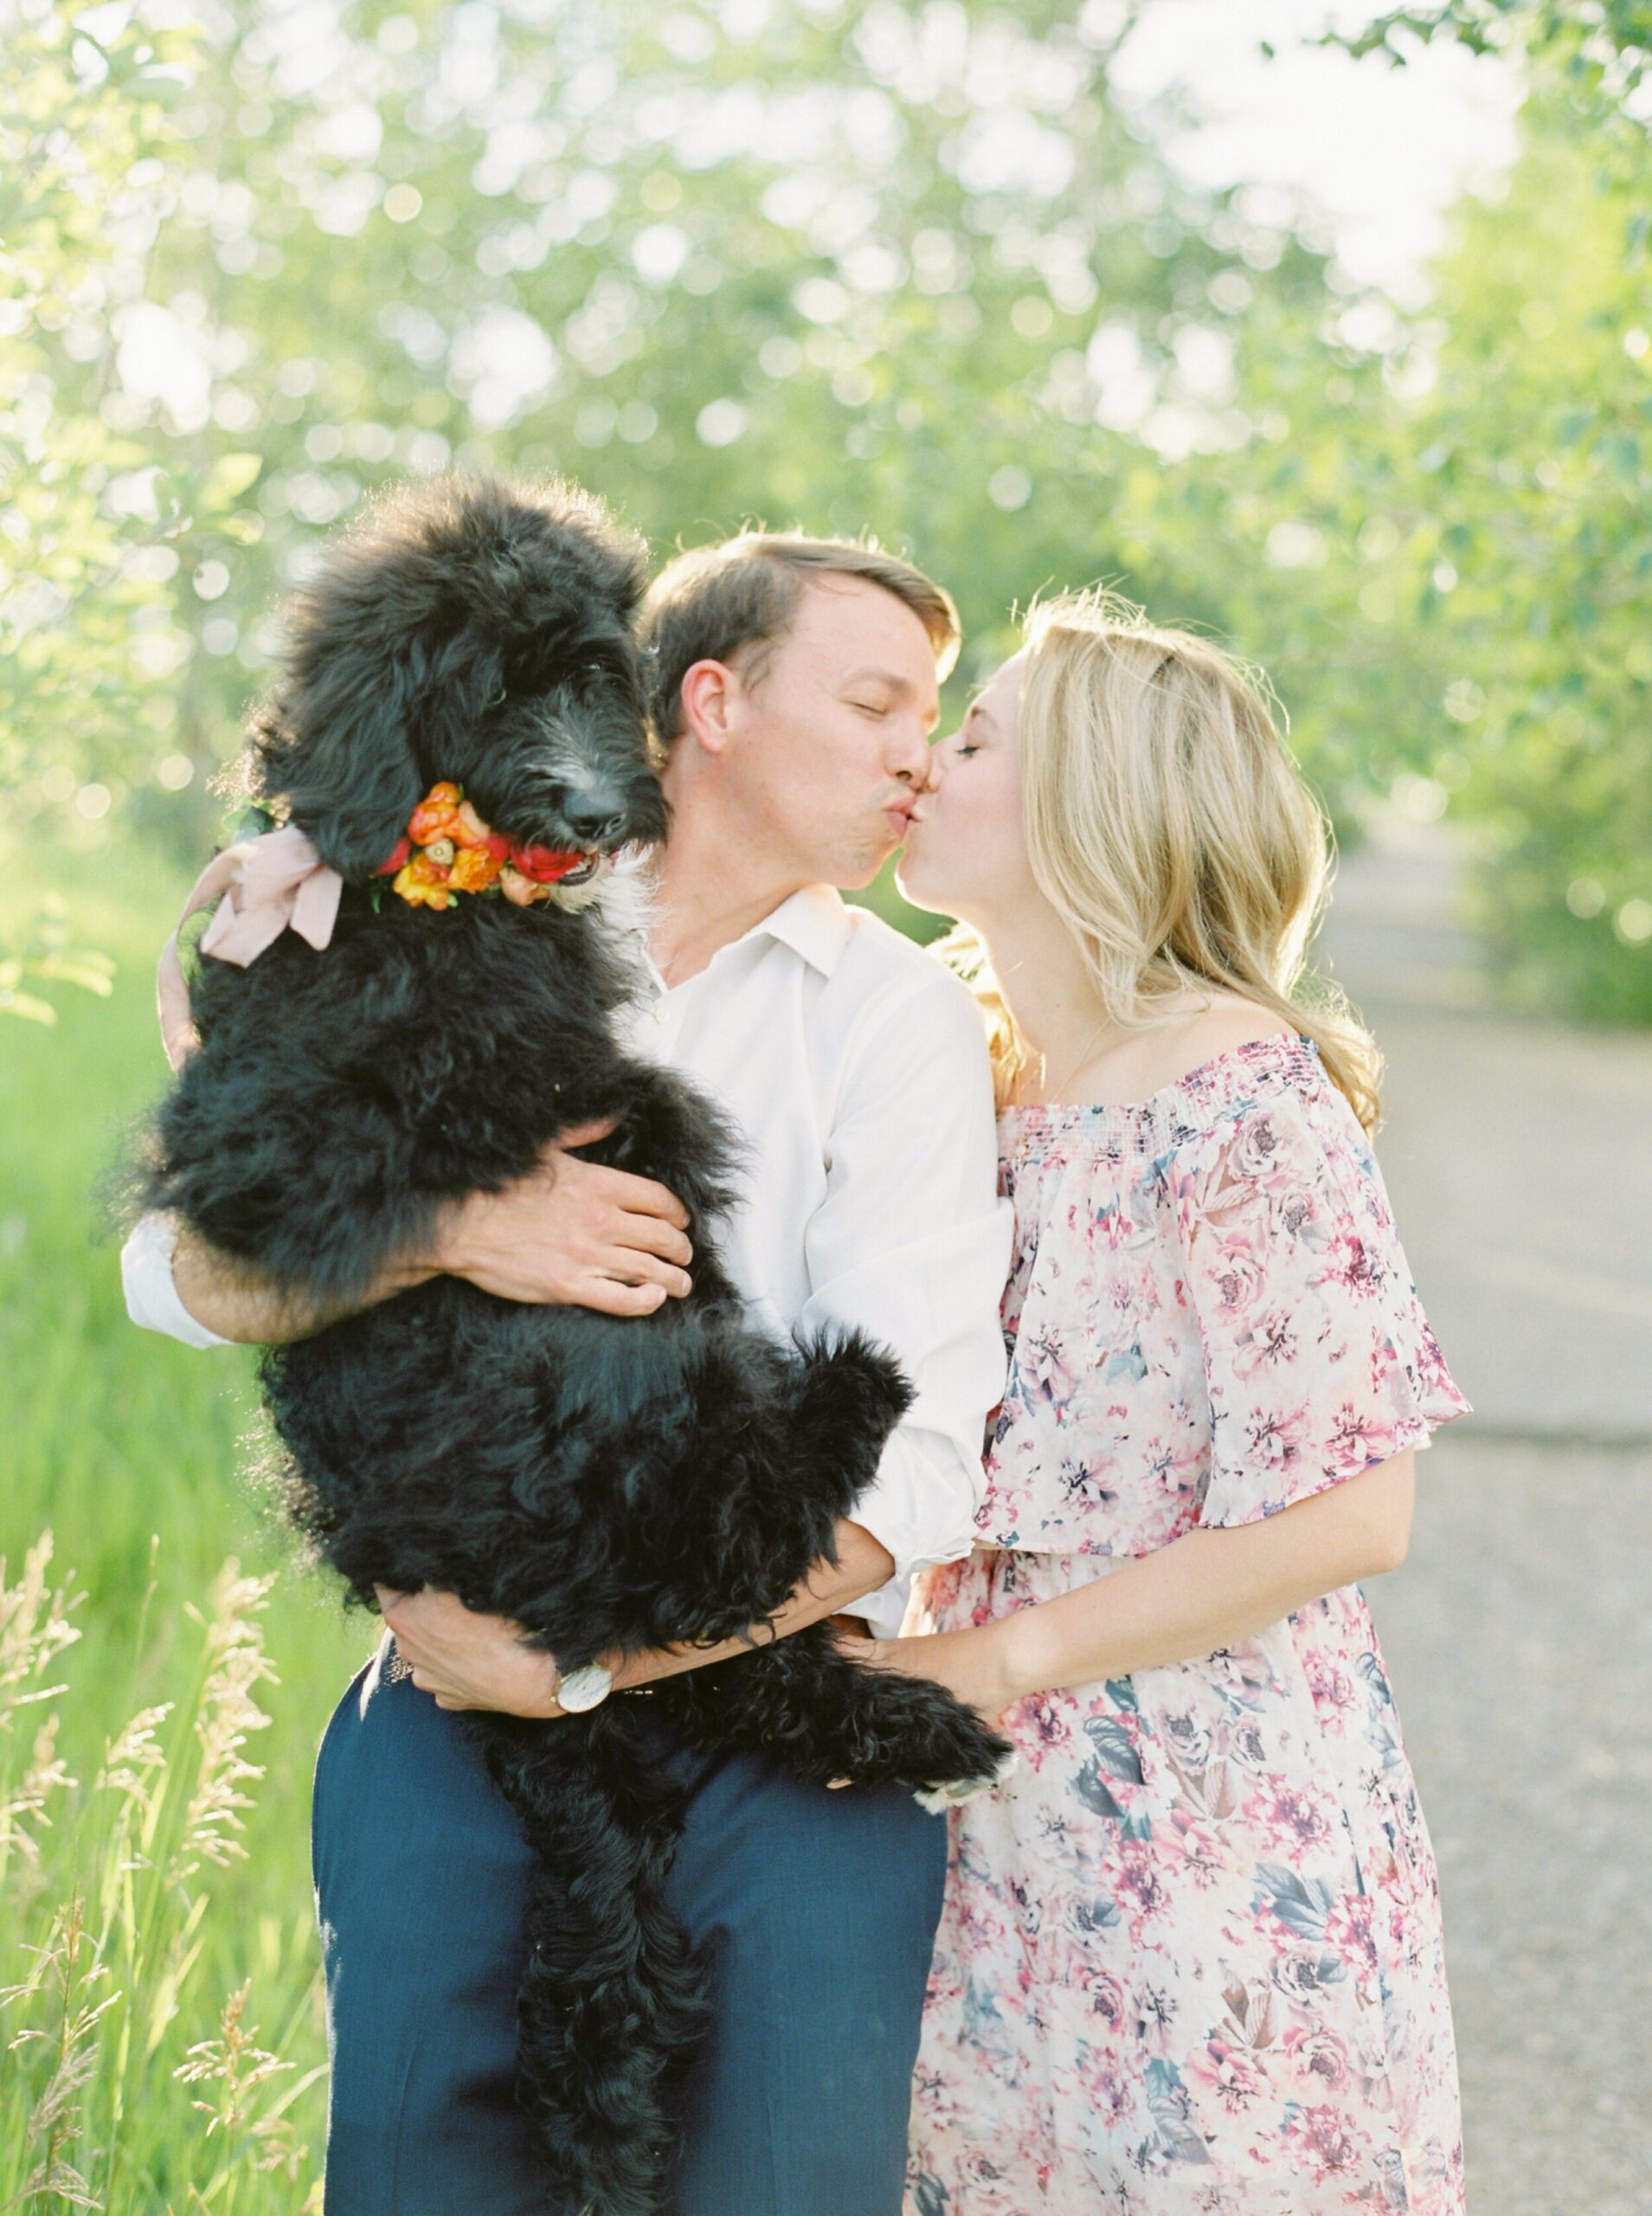  puppy with floral colar | nose hill park calgary summer engagement session | calgary fine art film wedding & engagement photographer justine milton 